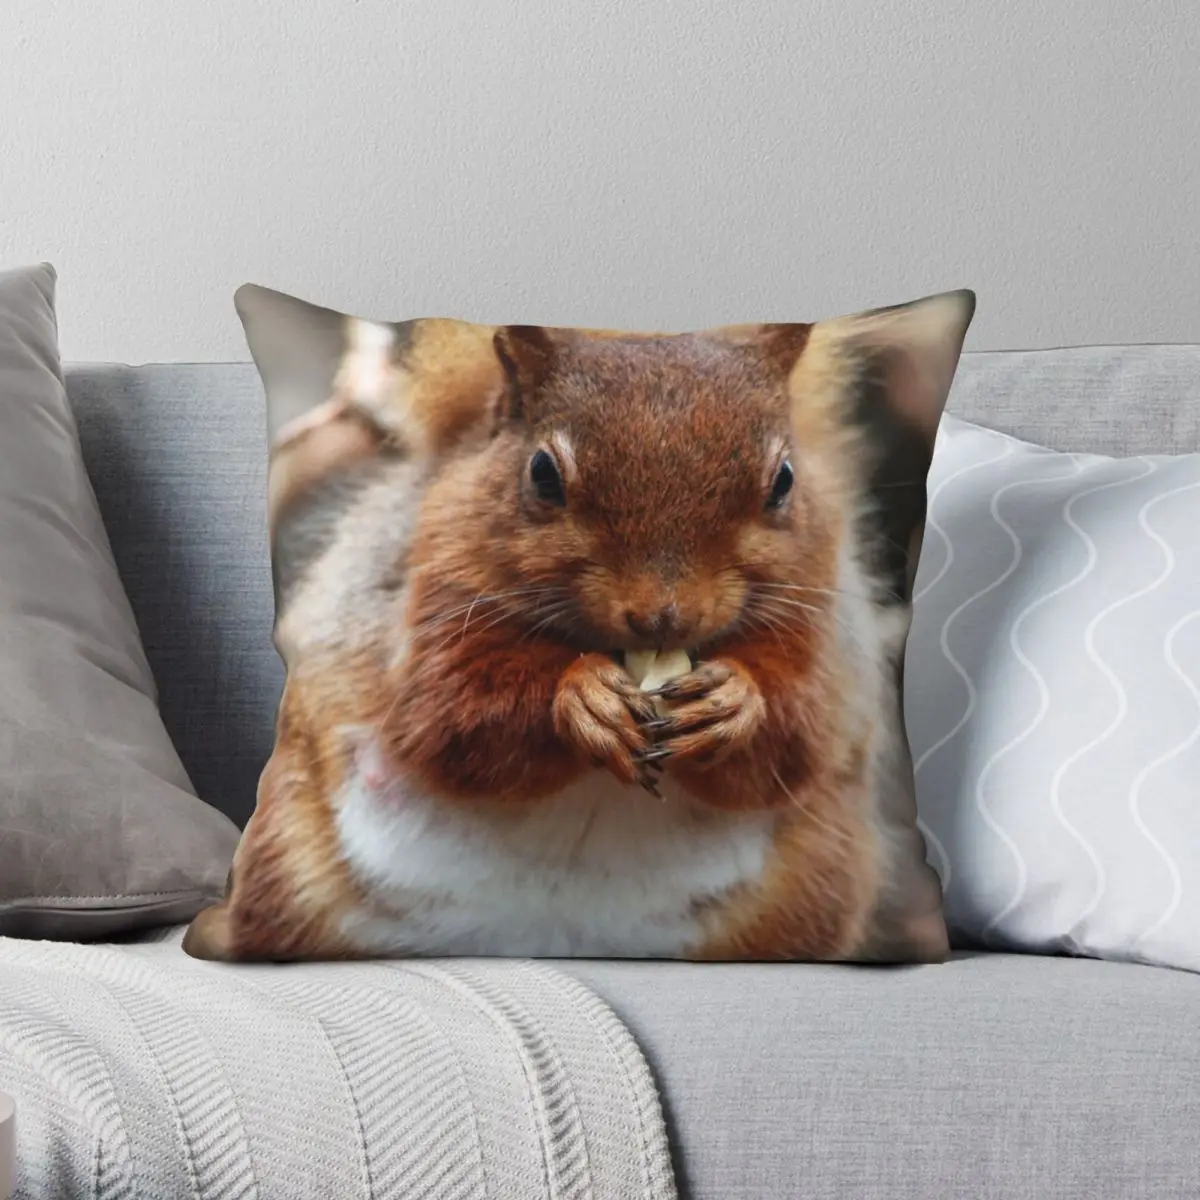 

Hungry Red Squirrel Square Pillowcase Polyester Linen Velvet Pattern Zip Decor Pillow Case Car Cushion Cover Wholesale